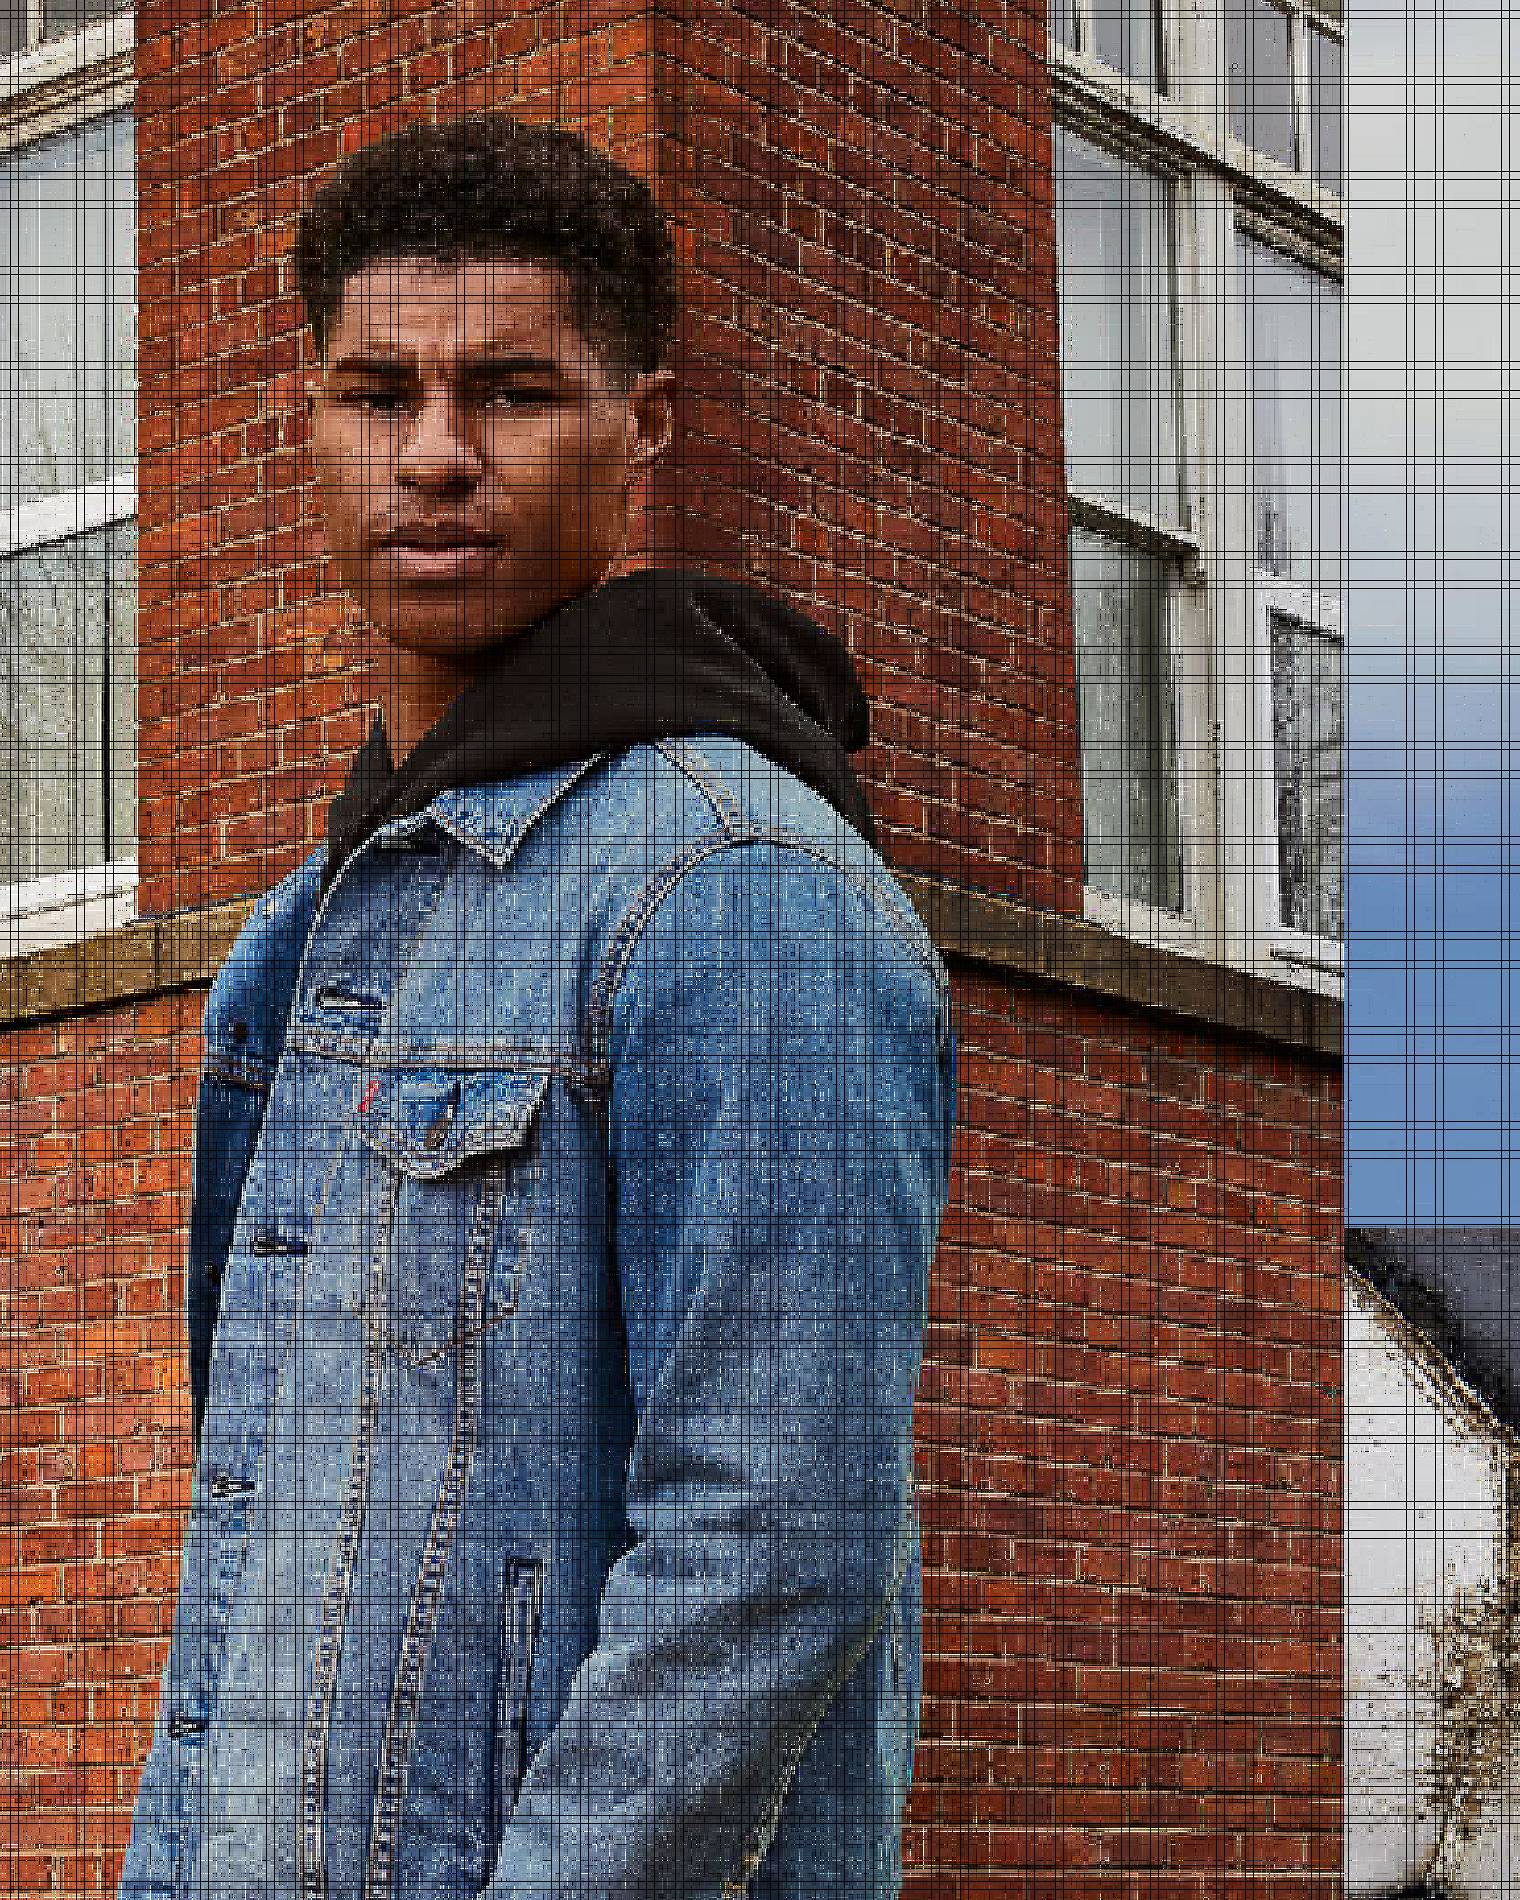 Three photos overlaid on a photo of blue sky. The first photo is a closeup shot of the breast pocket of a Levi's Trucker jacket, the second photo is Marcus Rashford standing in front of a brick building wearing a black hoodie under a Levi's Trucker Jacket and the third photo shows the corner of a simple soccer goal with no net in black and white.